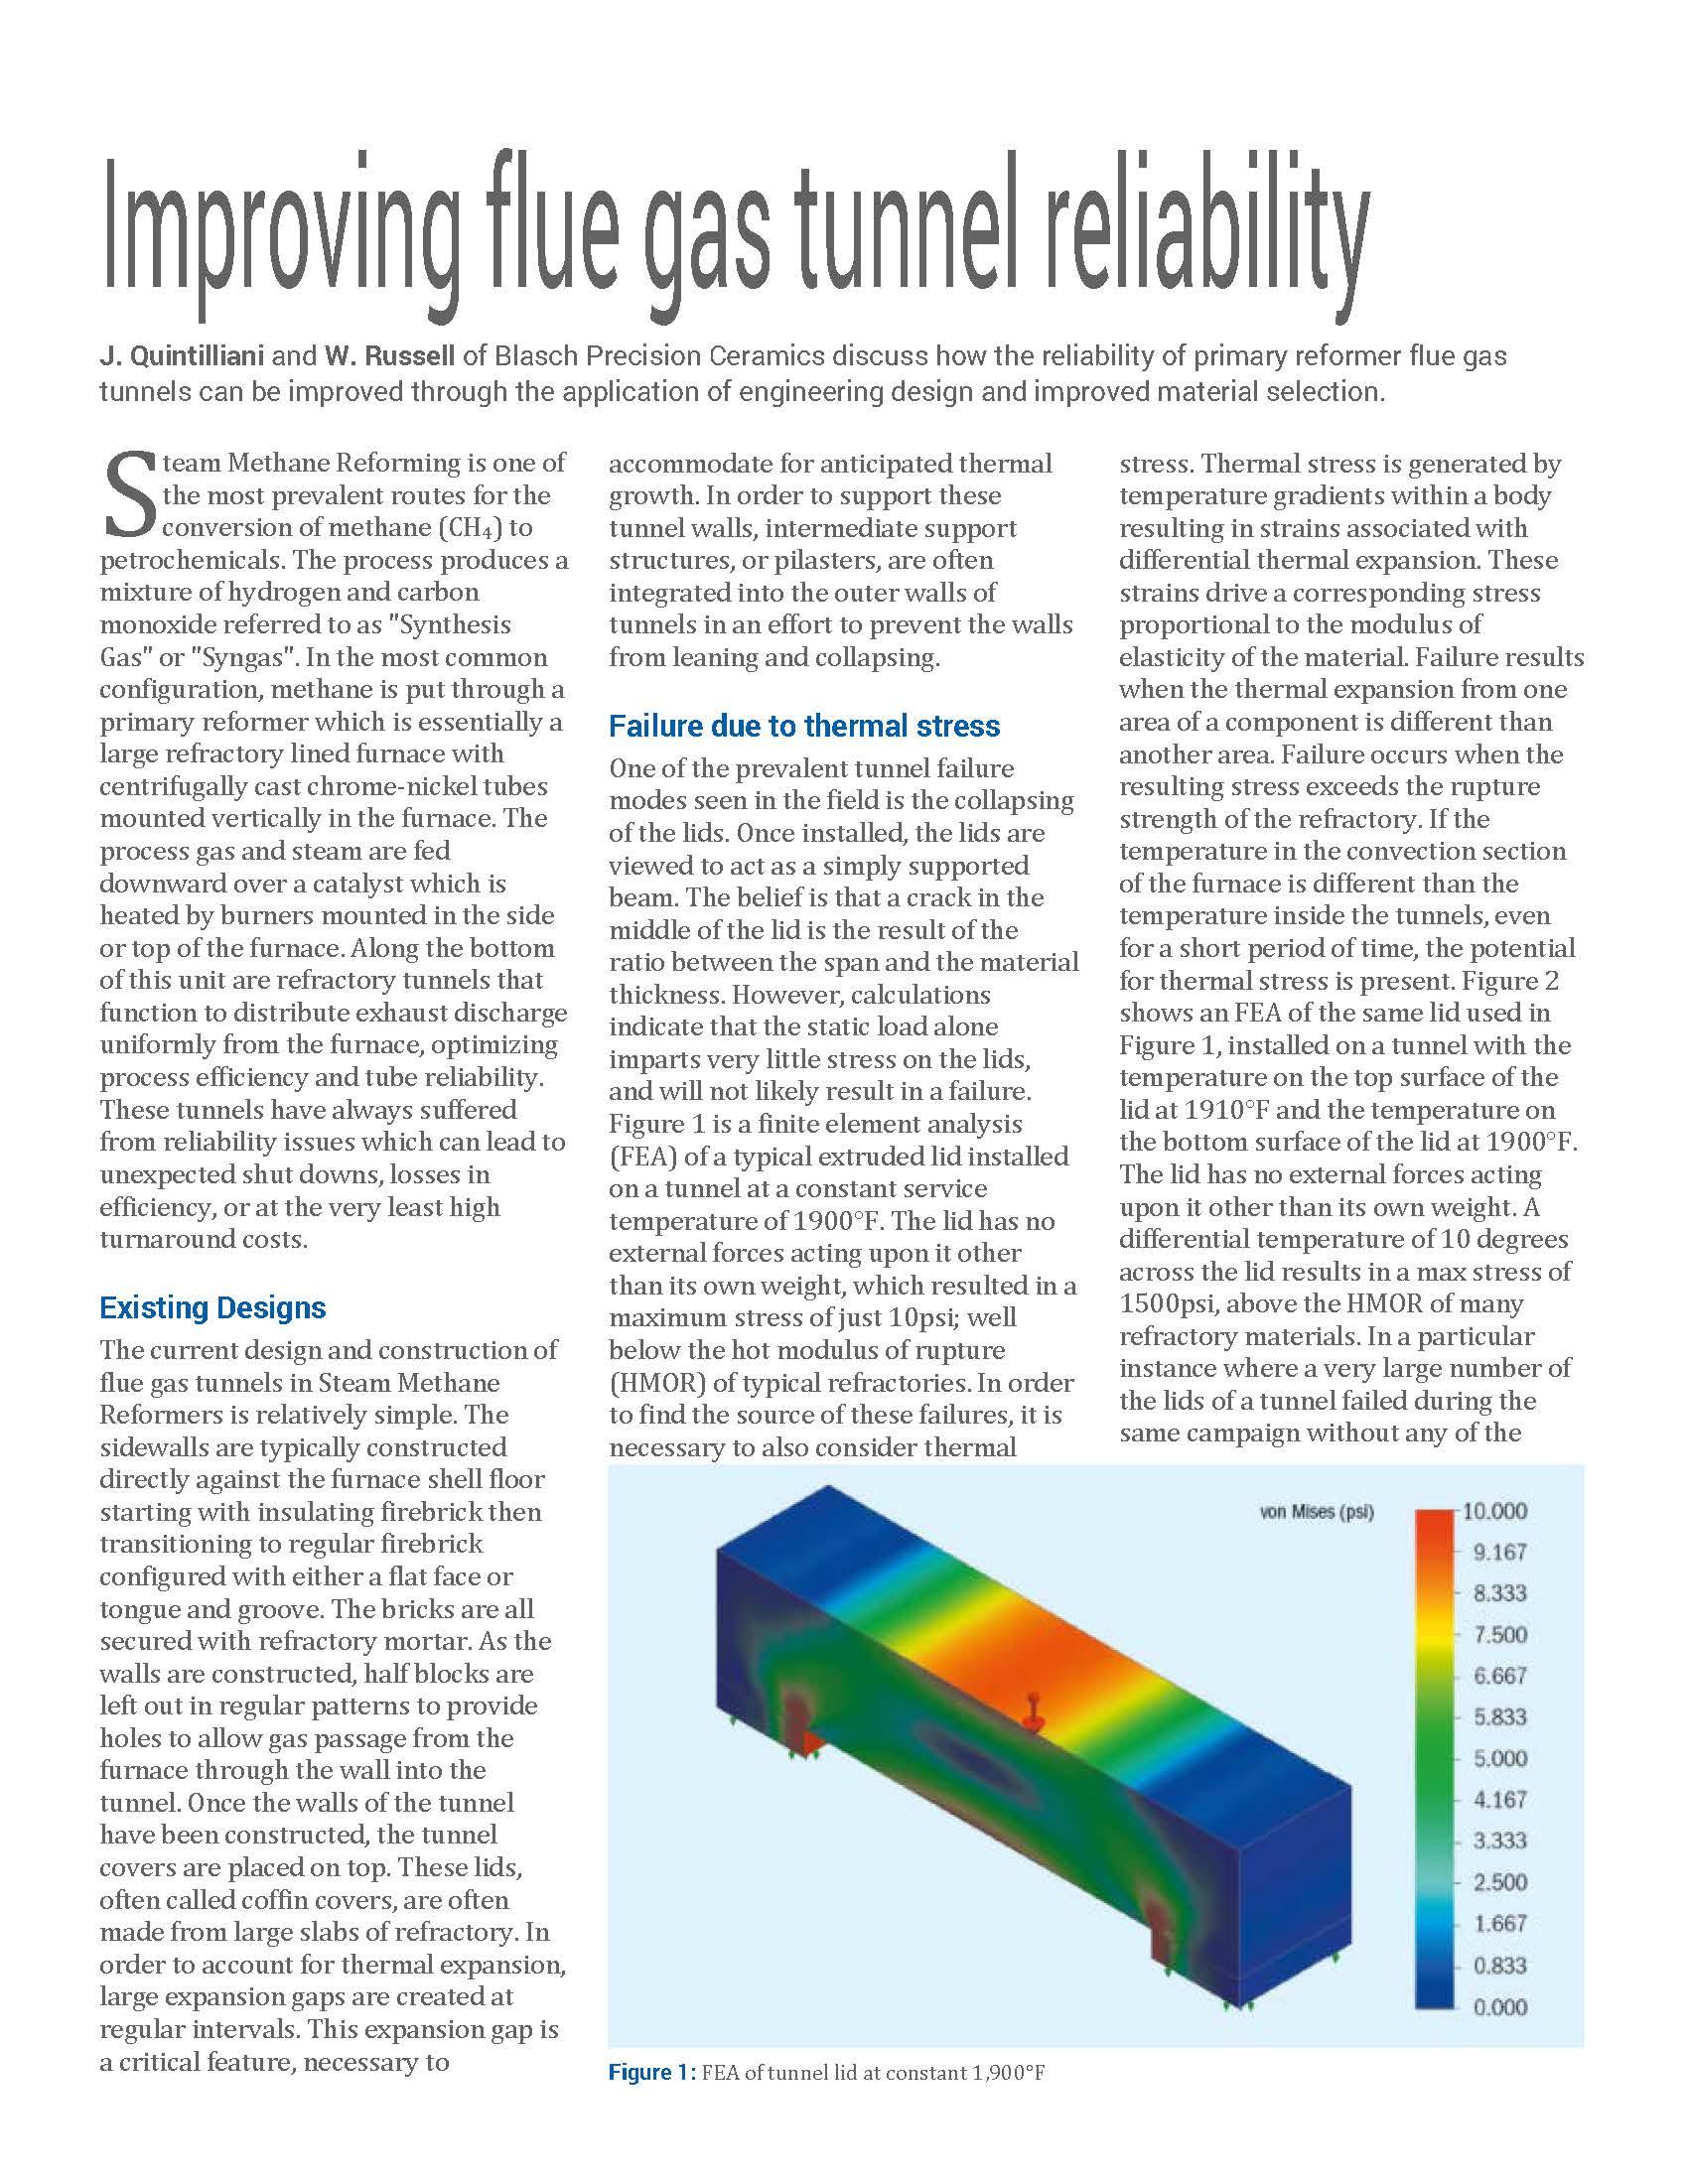 First page of "Improving flue gas tunnel reliability" white paper.